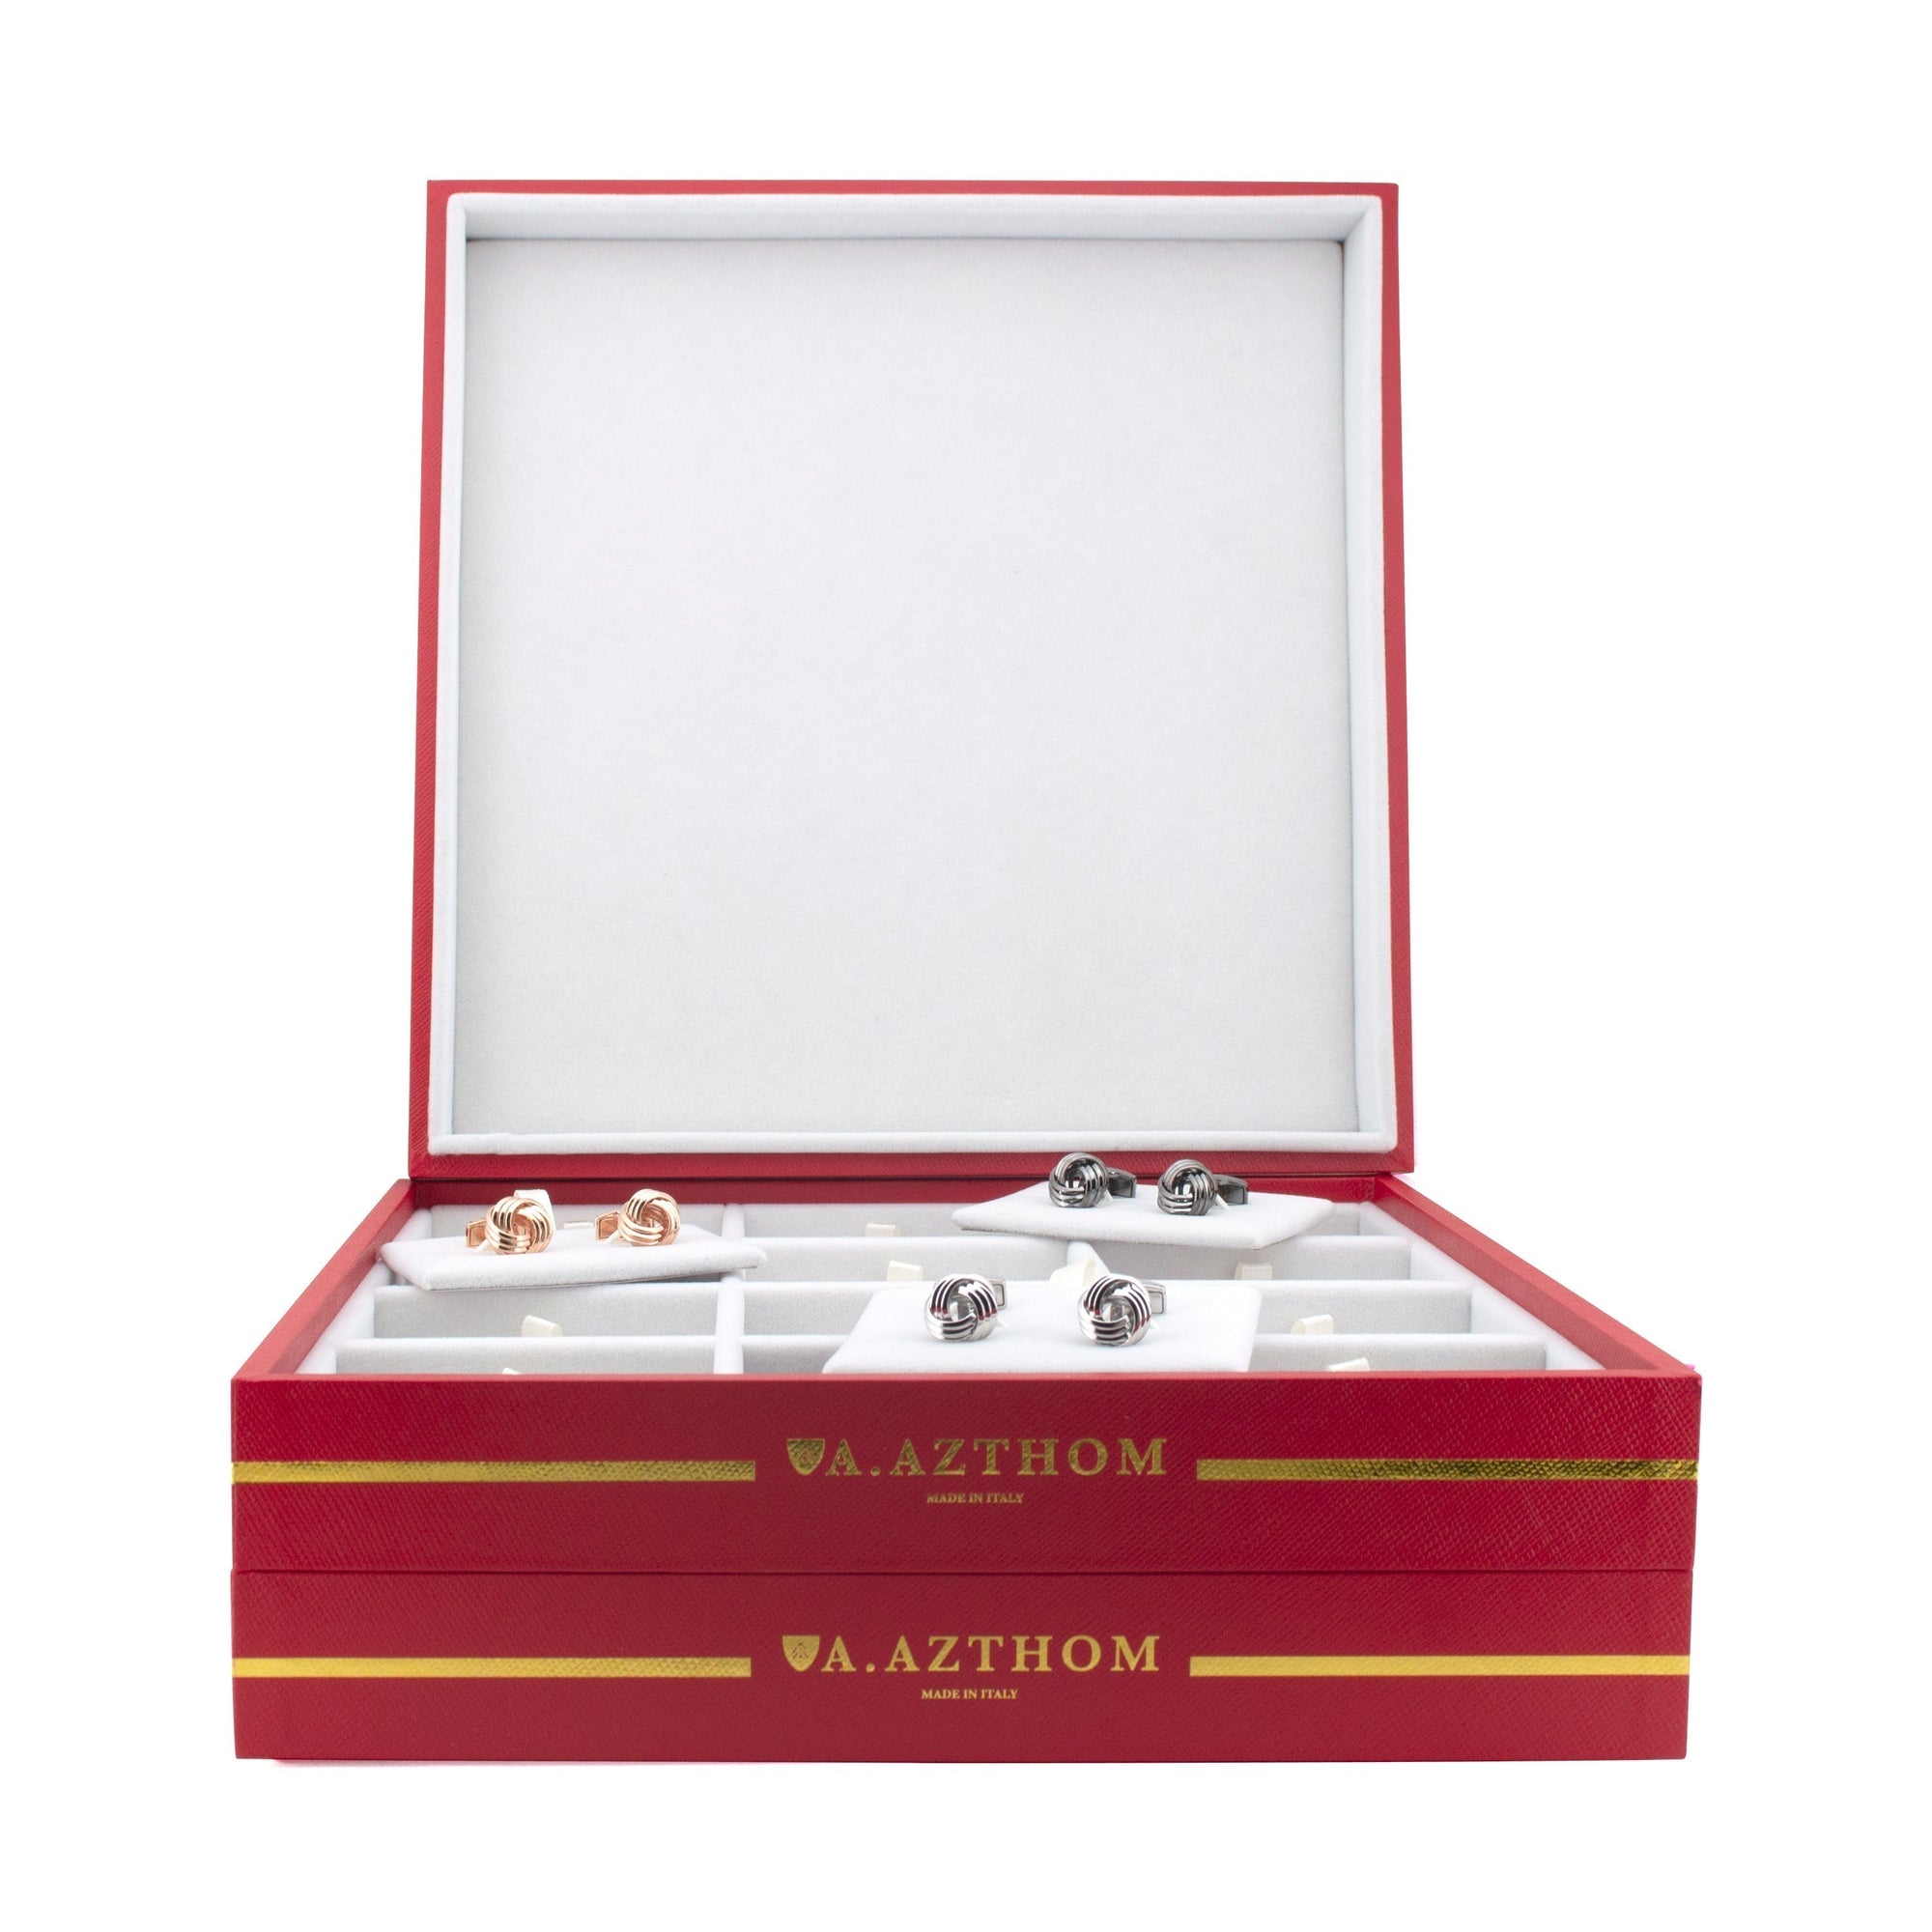 Professional Cufflinks Storage Tray in Red by Azthom-Cufflink Storage-A.Azthom-Cufflinks.com.sg